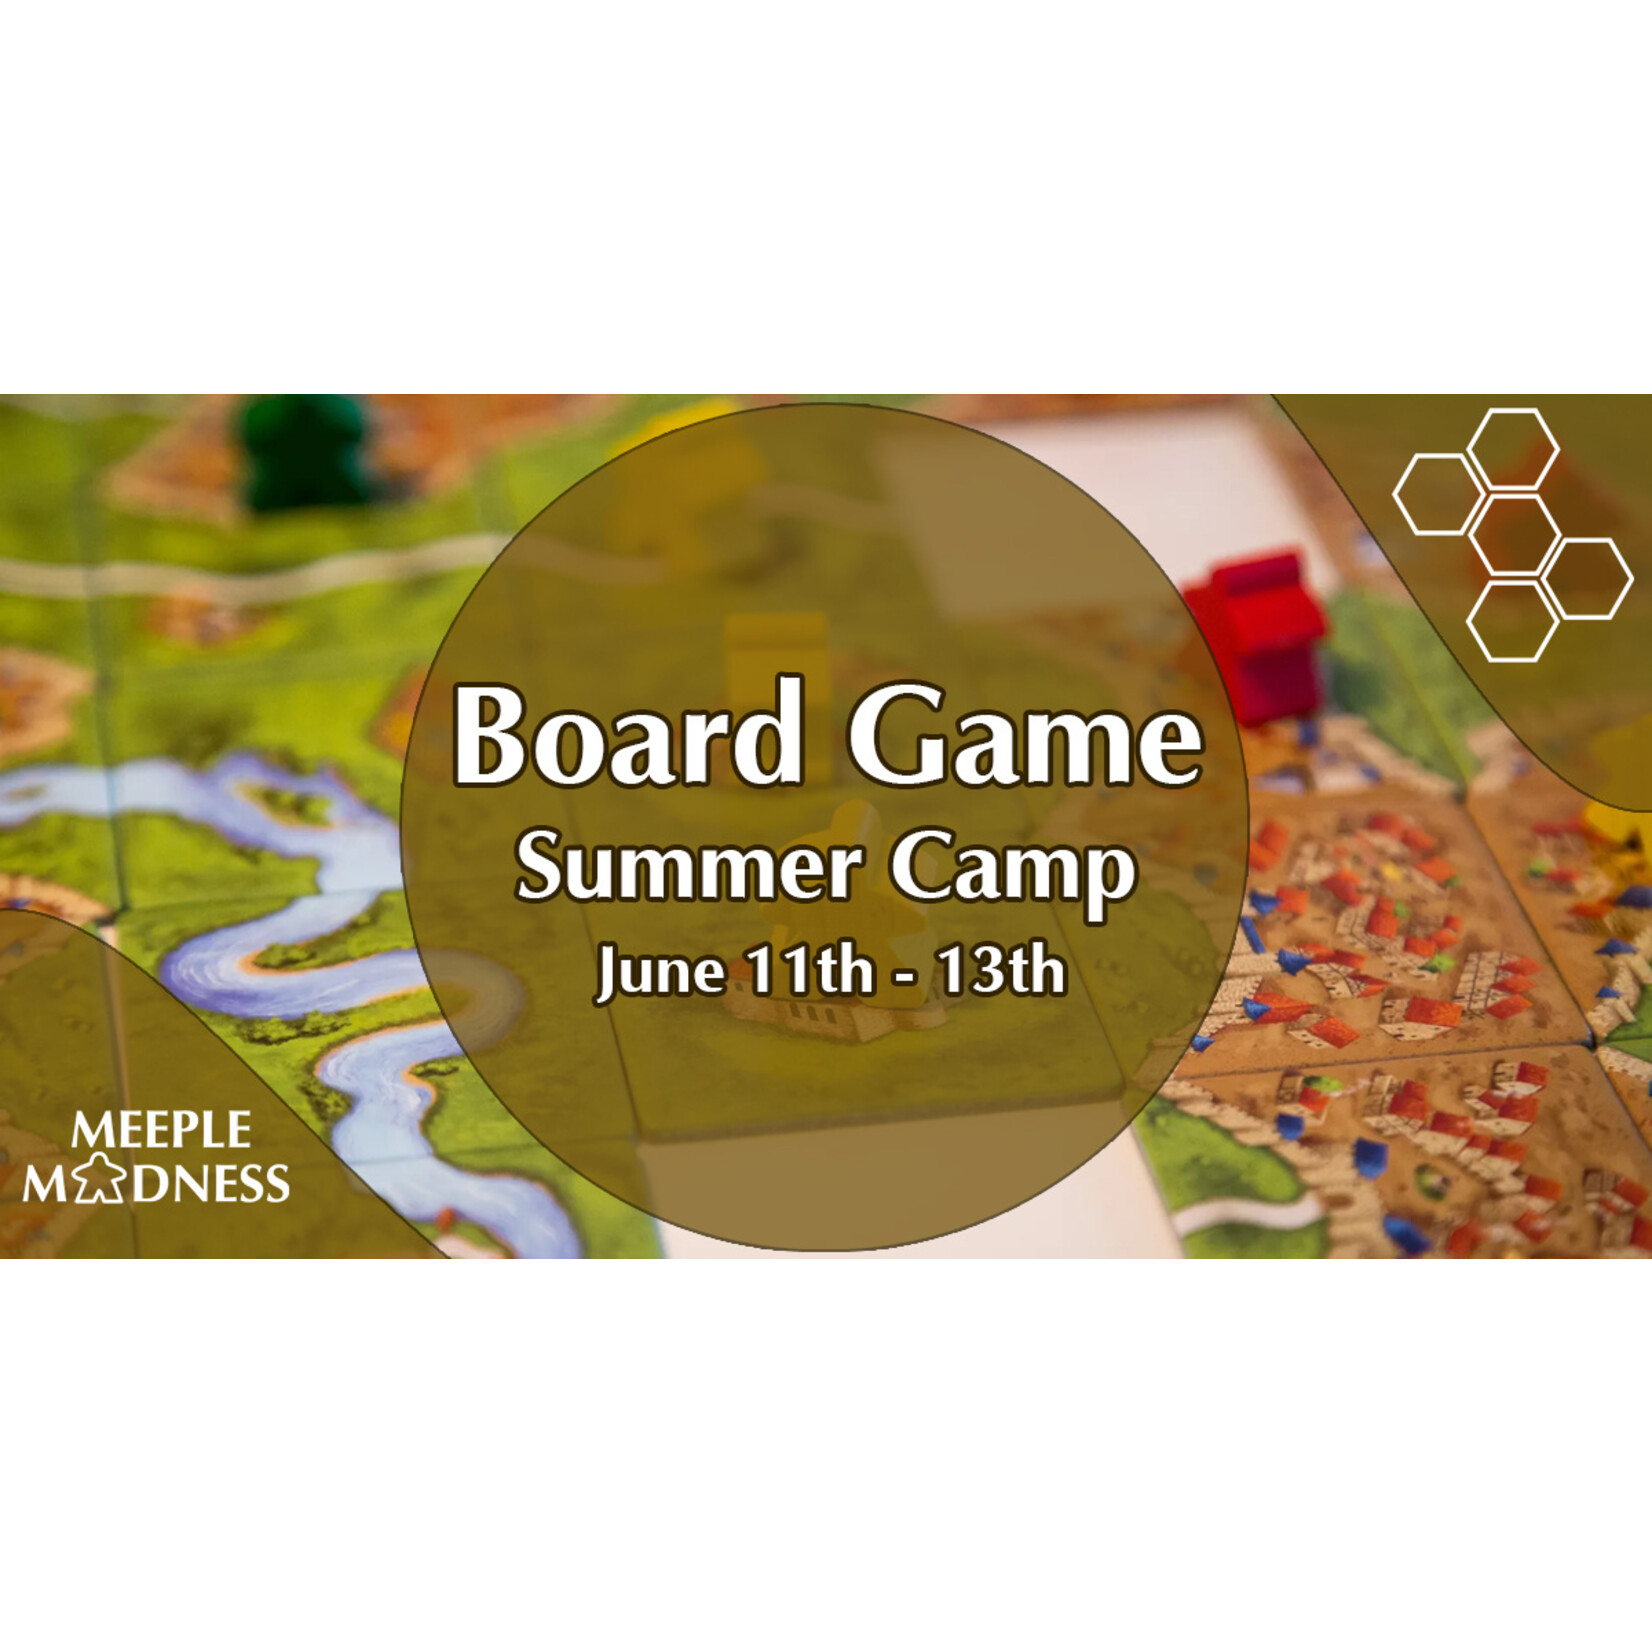 Meeple Madness Board Game Summer Camp Deposit